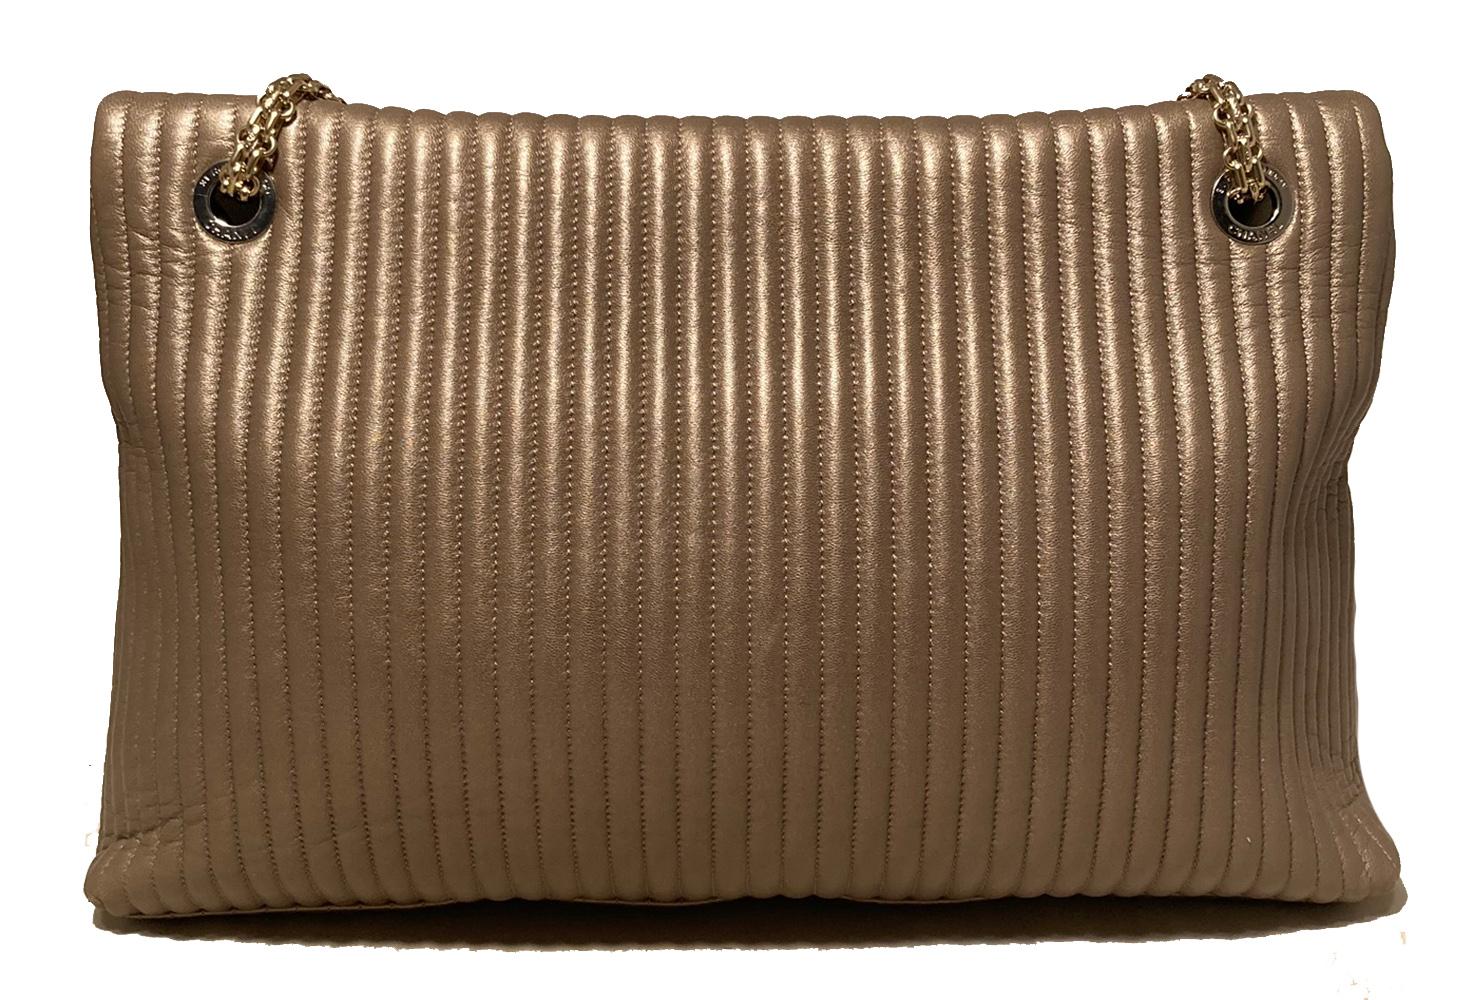 Chanel Vertical Stripe Quilted Classic Flap Reissue in excellent condition. Beautiful metallic champagne gold leather exterior in unique vertical stripe quilted pattern with matte gold reissue chain shoulder strap. Front mademoiselle twist closure